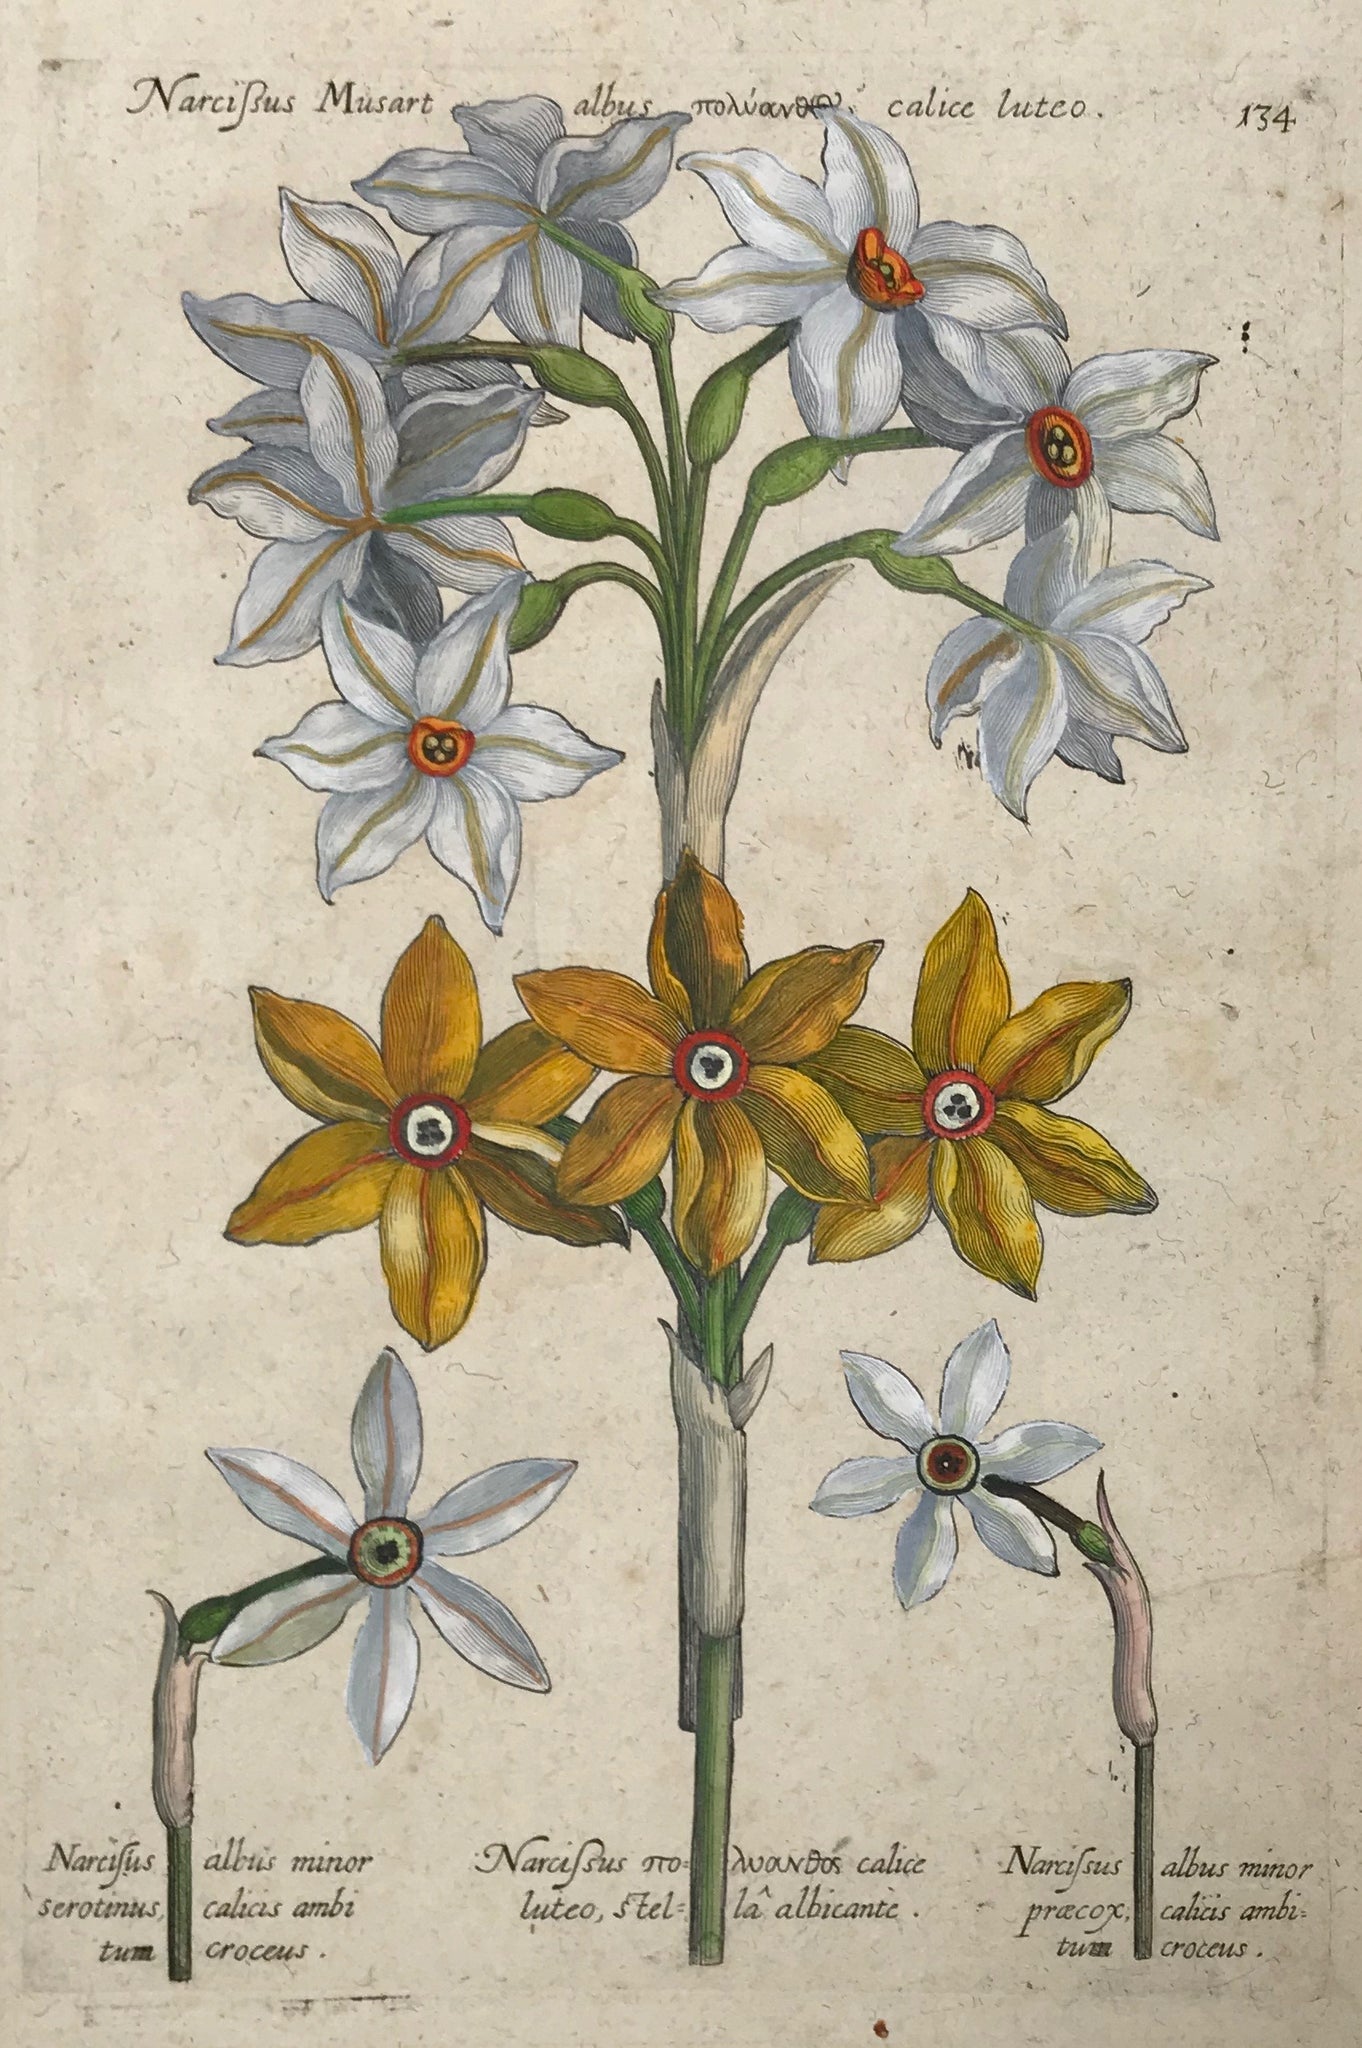 Daffodil,    De Bry 134  134. Narcisissus Musart albus calice luteo. Narcissus albus minor præcox calcis ambitum croceus. Narcisus calice luteo stella albicante.  Antique Botanical Prints by De Bry  Johann Theodor De Bry (1528-1598) came from Liege, Belgium to Frankfurt on the Main and founded about 1570 an important publishing house. The famous Florilegium Novum, a comprehensive flower book 